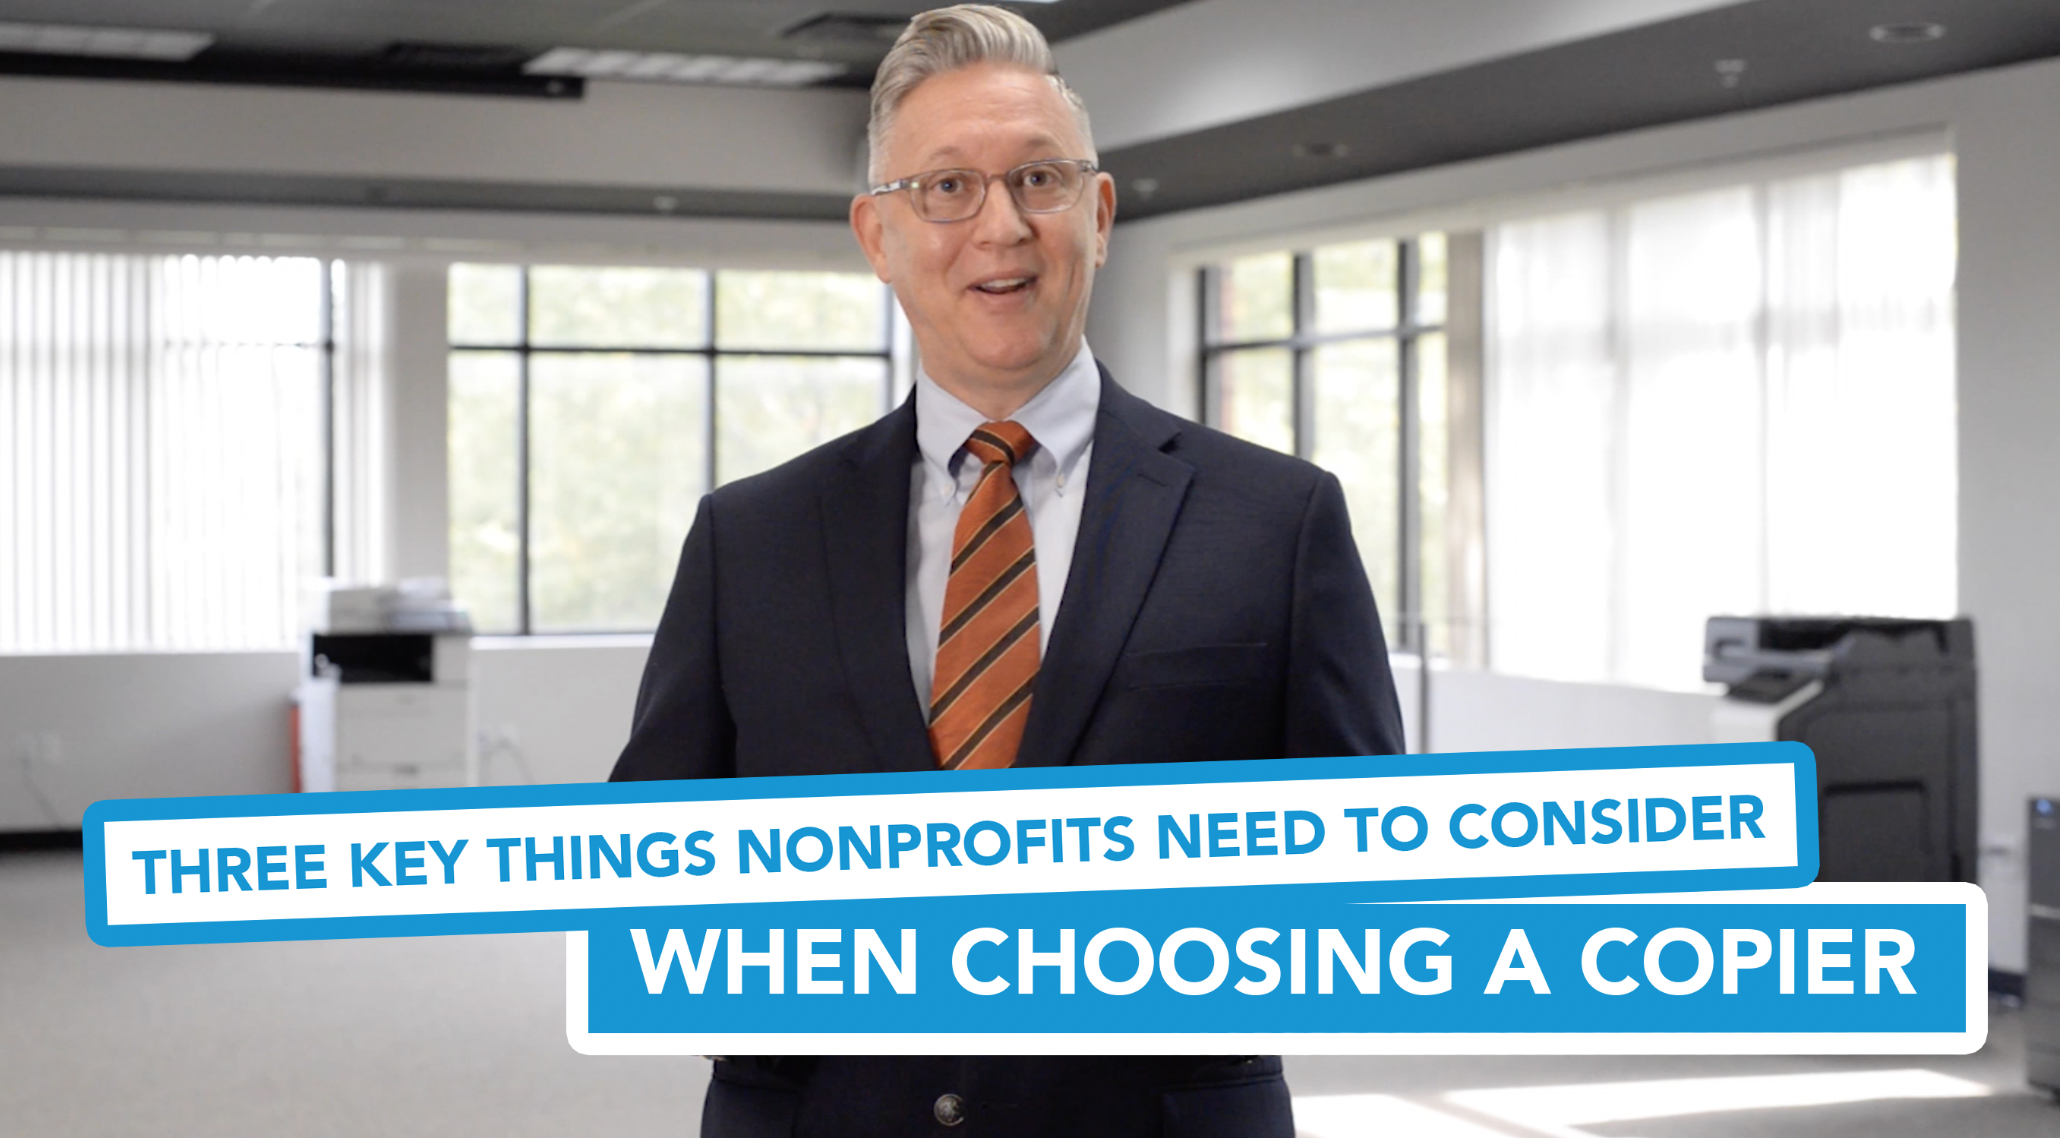 Three Key Things Nonprofits Need to Consider When Choosing a Copier